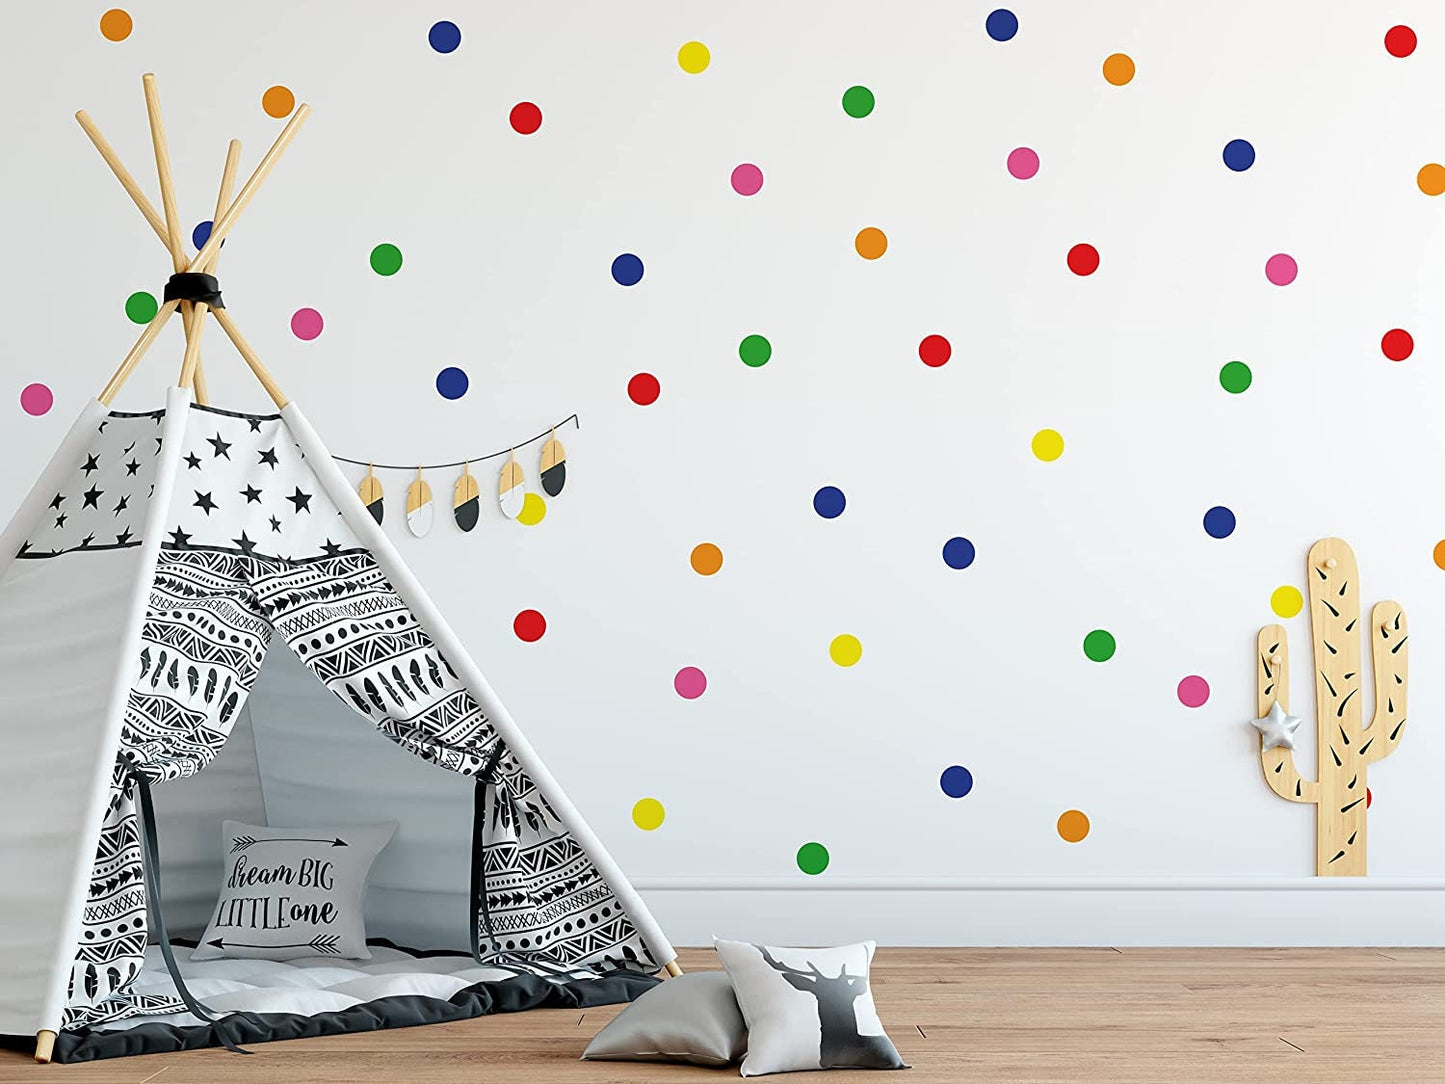 Colourful Polka Dot Wall Stickers | Wall Decals For Kids Rainbow Multi Colour Wall Decor